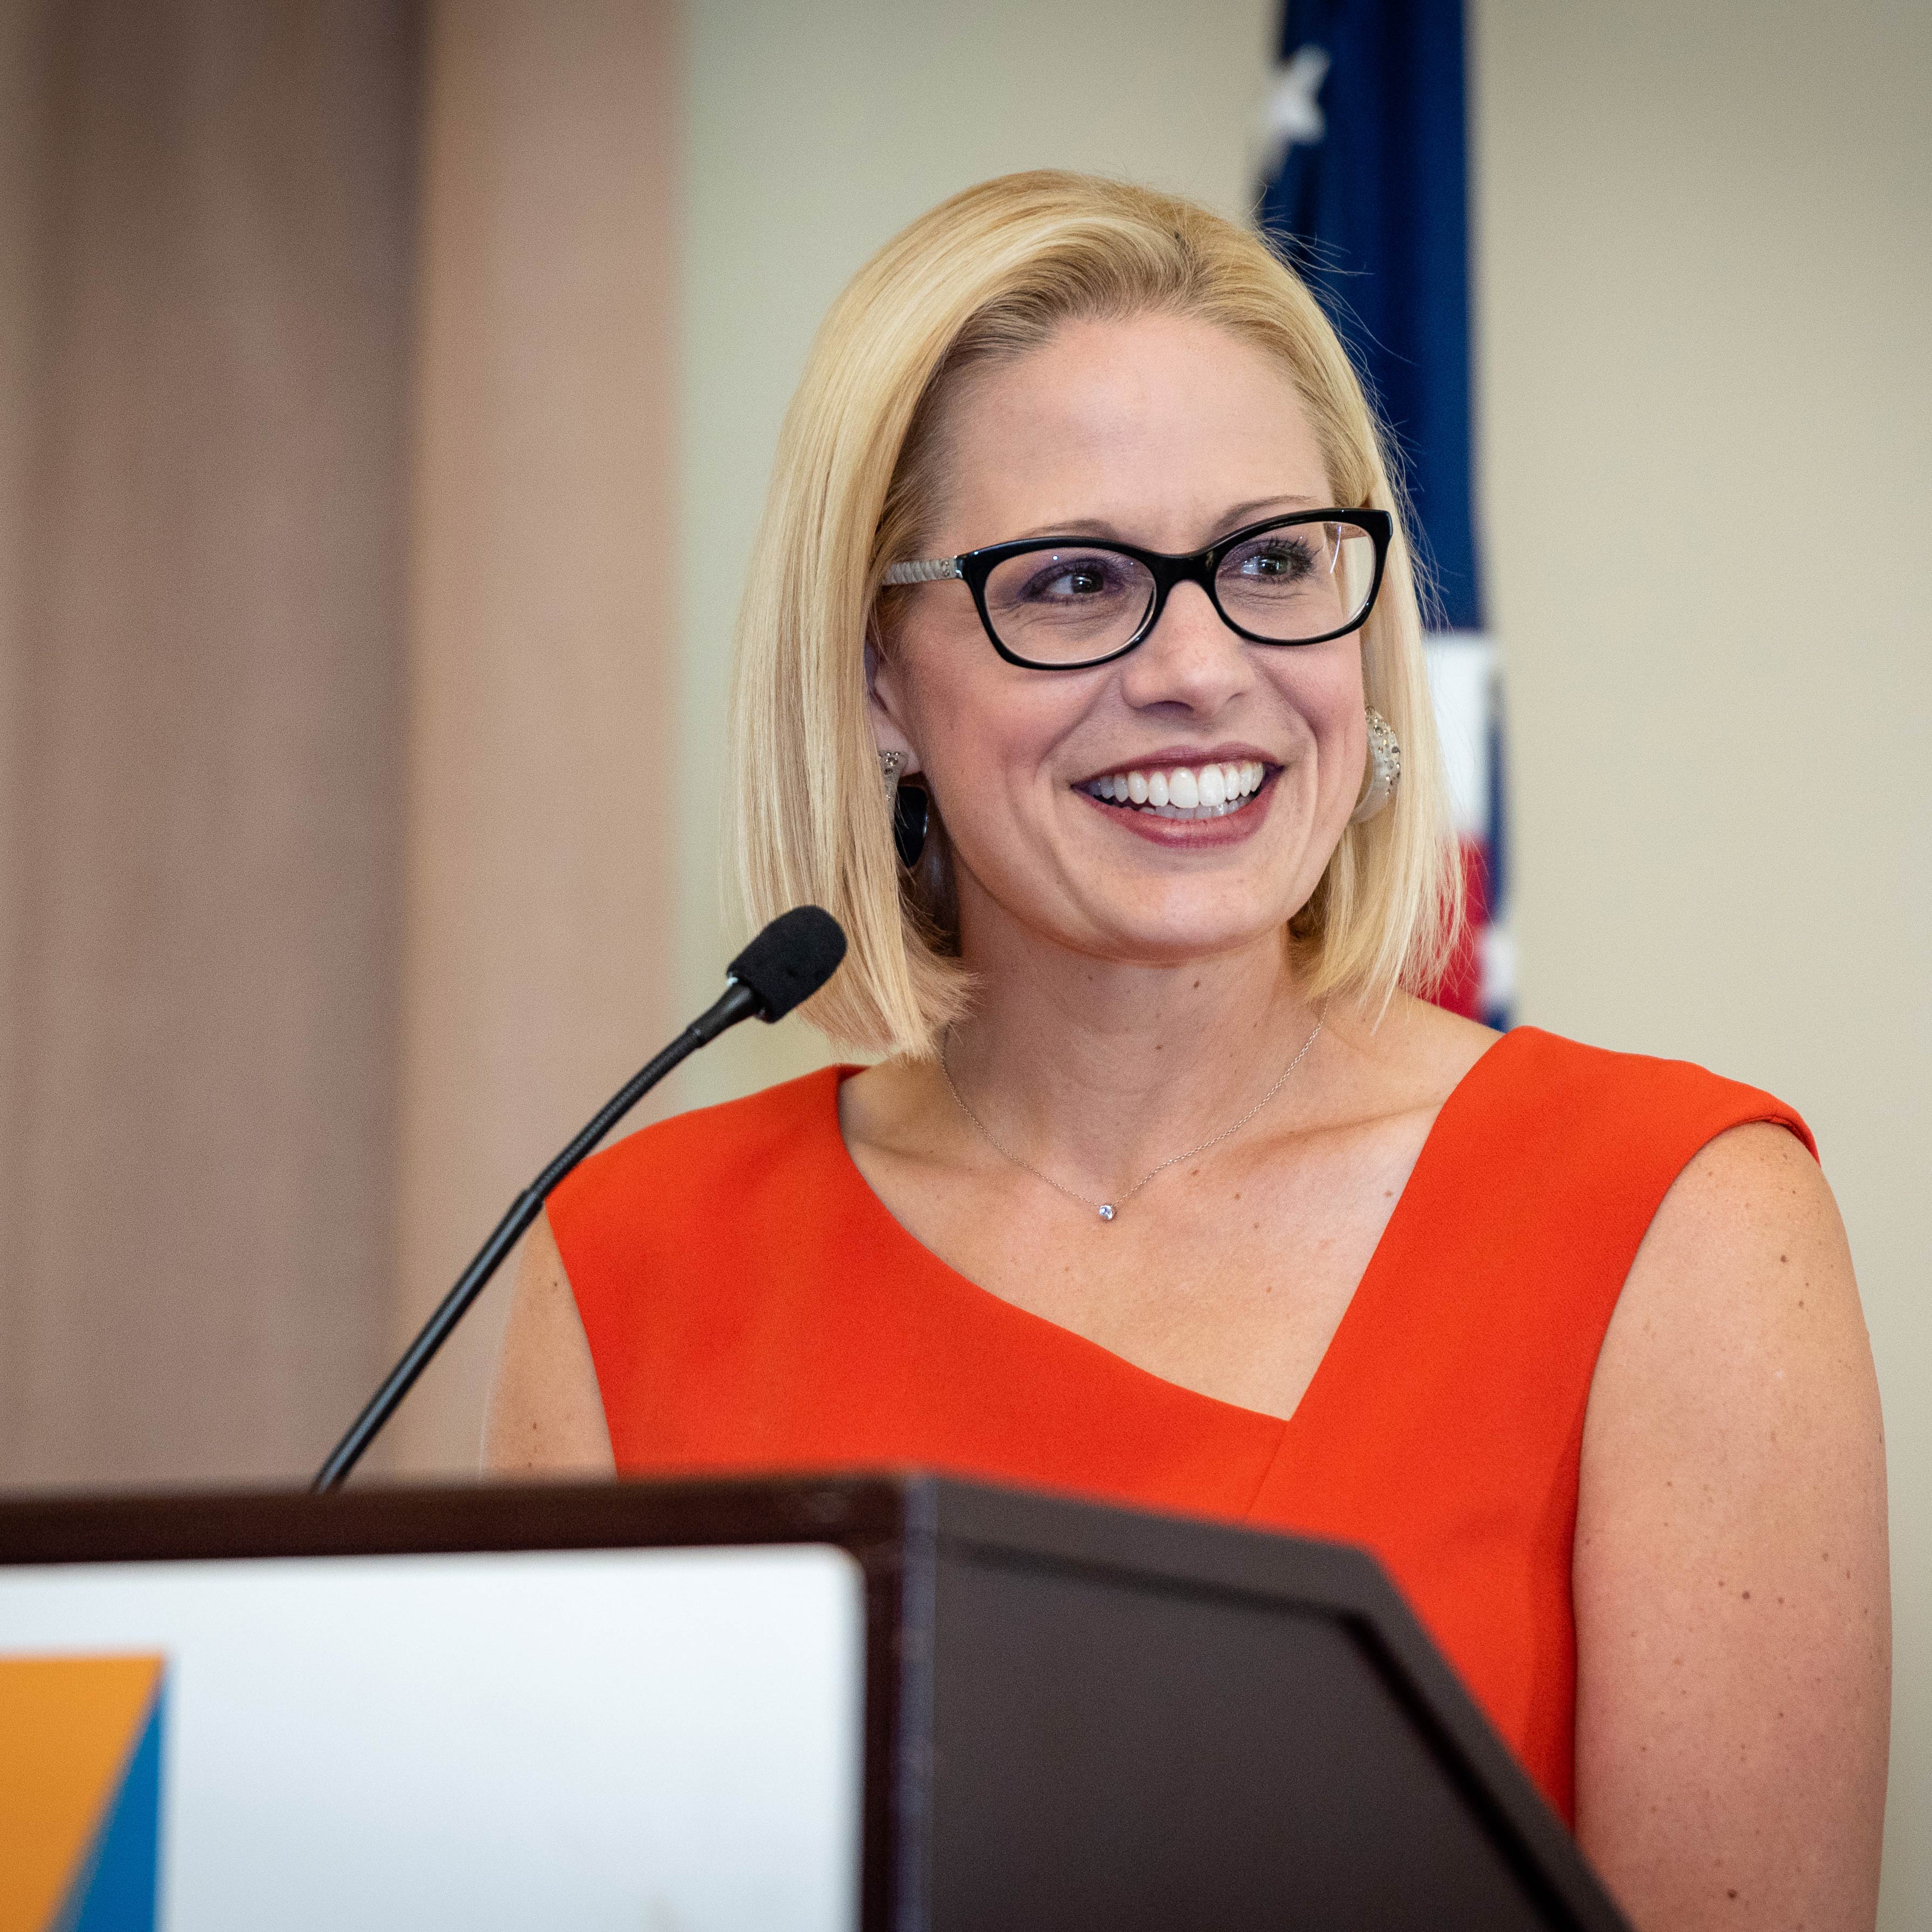 Blonde woman in glasses and orange dress